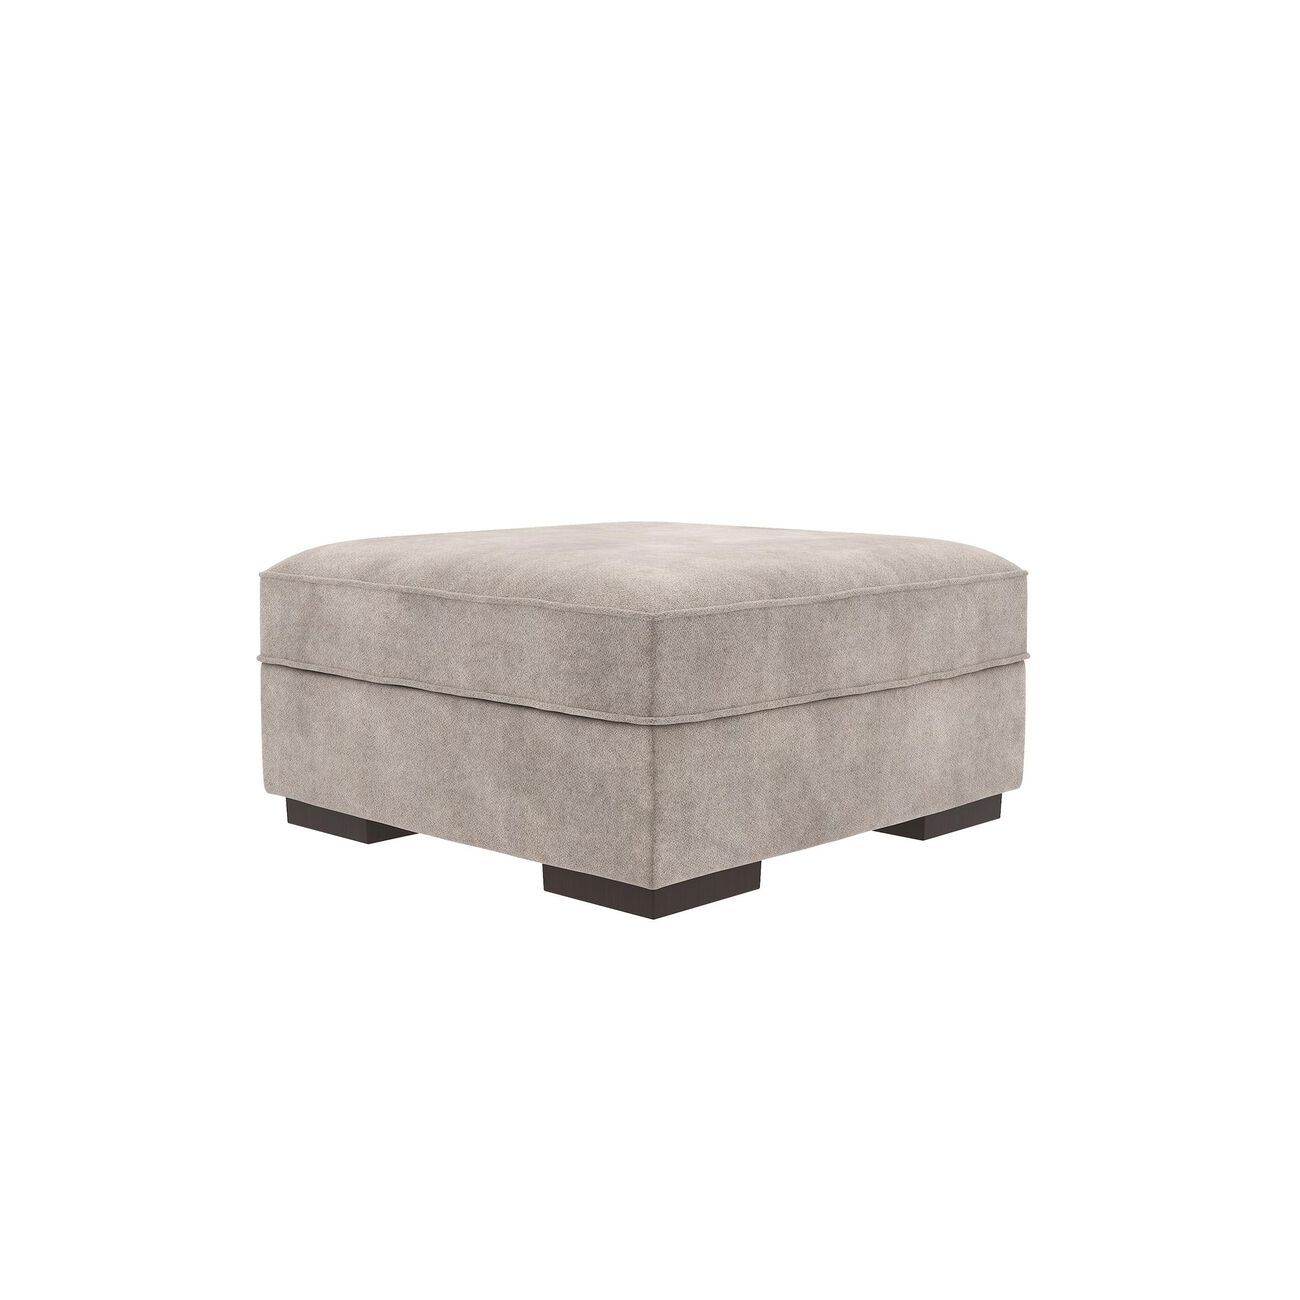 Wooden Storage Ottoman with Durable Block Legs, Silver and Black